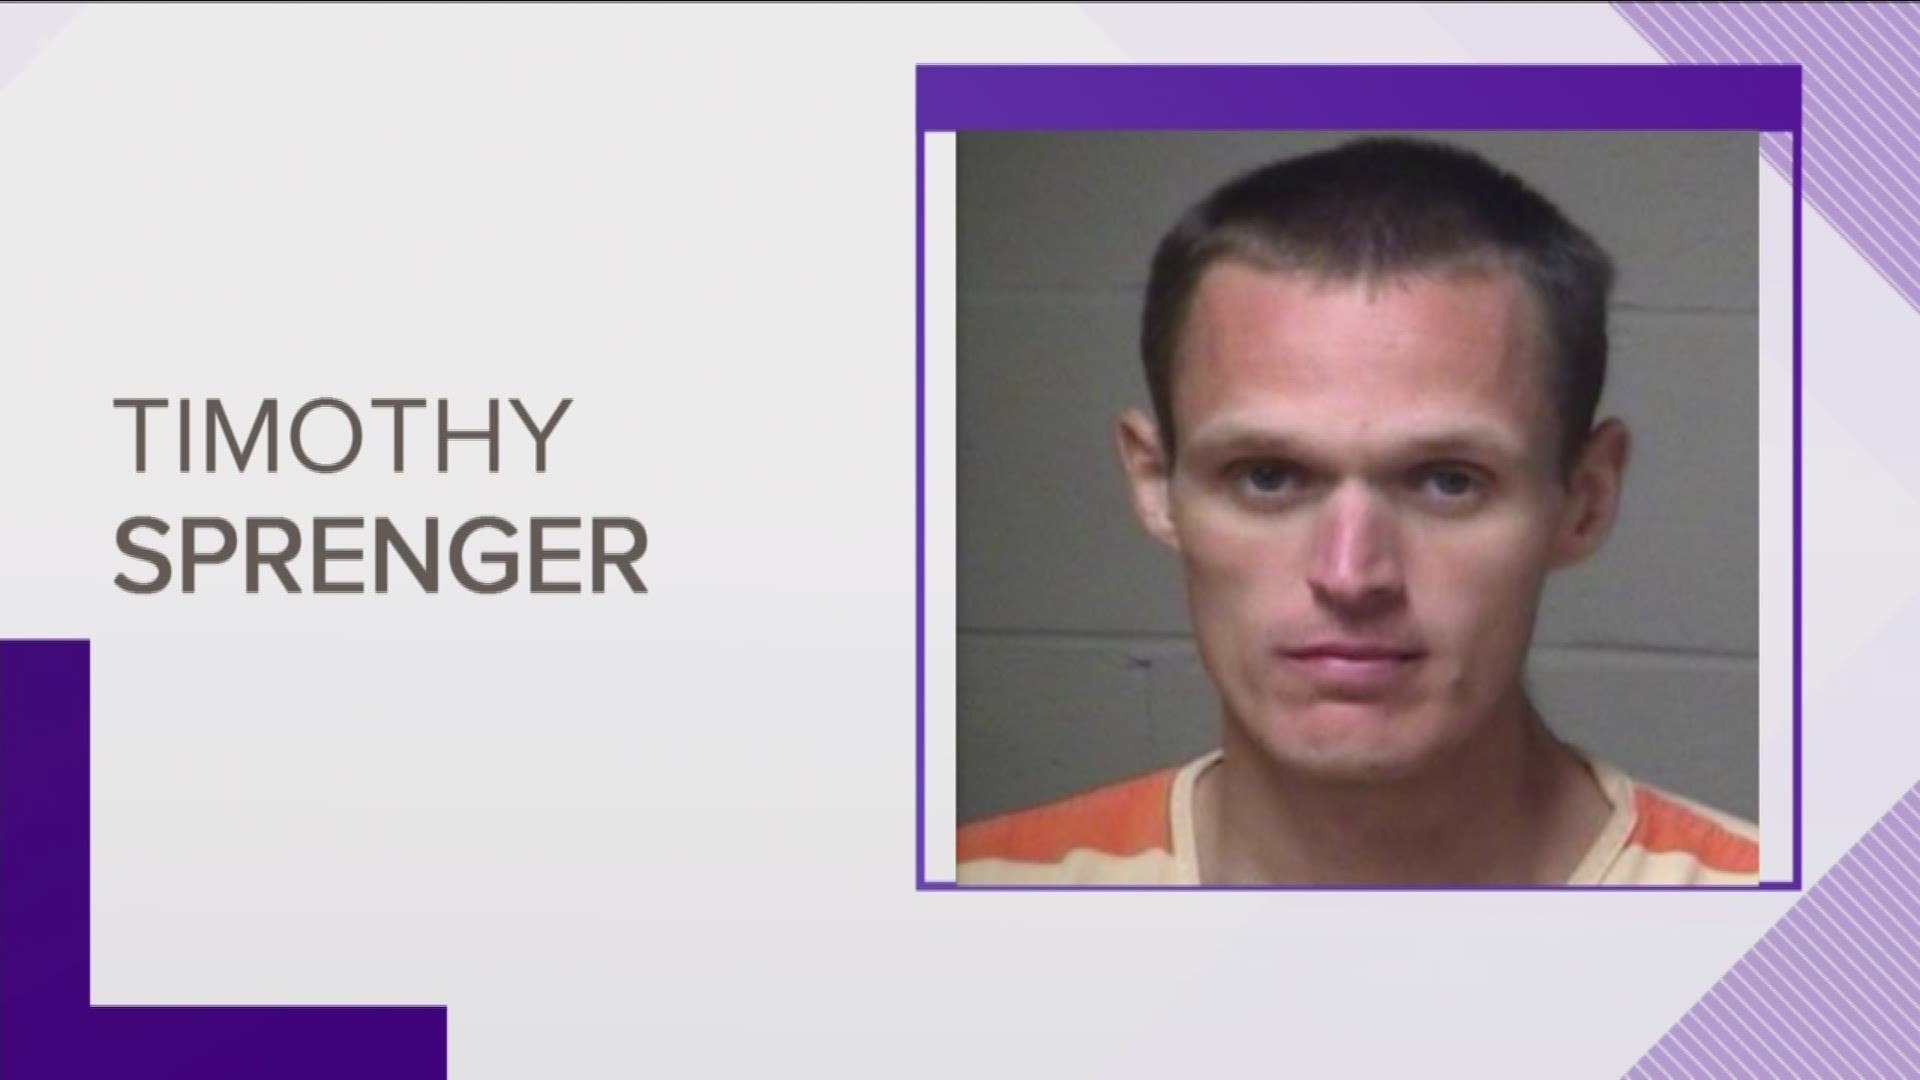 Timothy James Sprenger, 32, has pleaded guilty to sexually assaulting a baby and toddler in North Dakota over a decade ago.